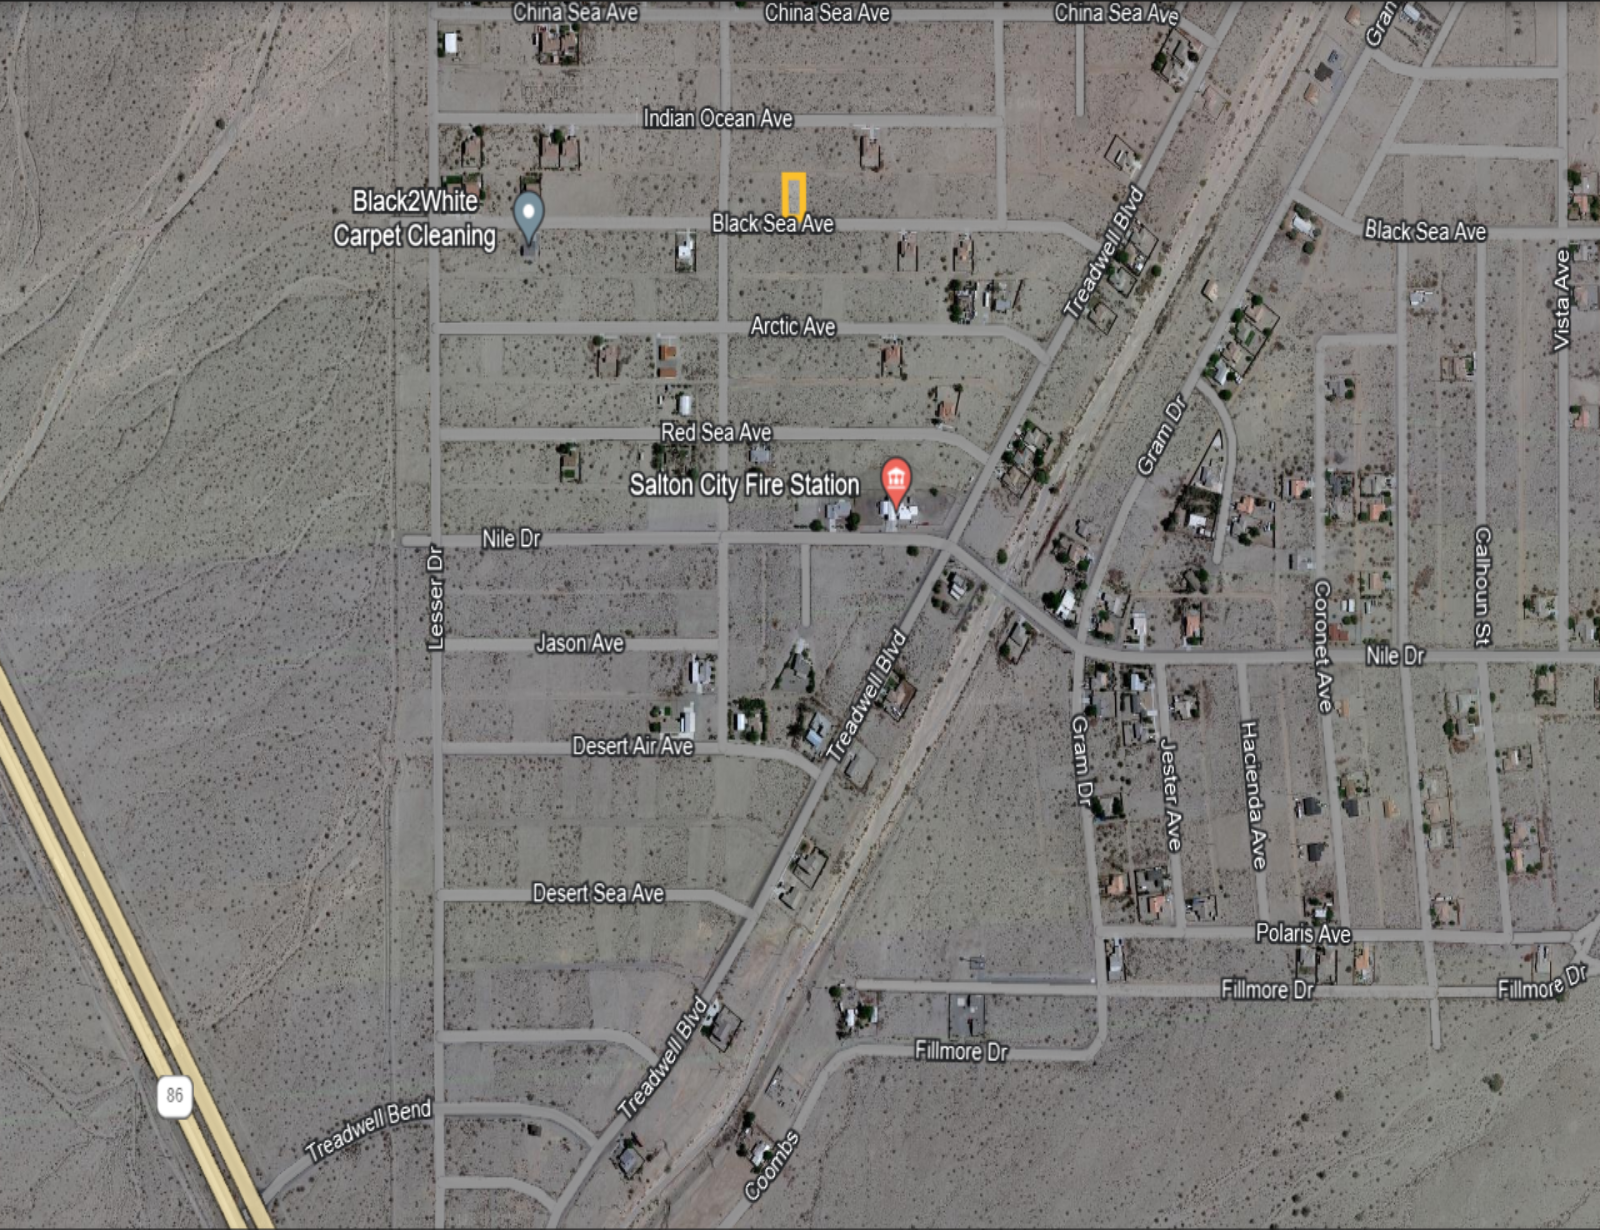 *NEW* GREAT RESIDENTIAL LOT IN VISTA DEL MAR WITH BEAUTIFUL SCENERY!! LOW MONTHLY PAYMENTS OF $225.00  1536 Black Sea Ave., Salton City, CA 92275 APN: 007-522-025-000 - Get Land Today